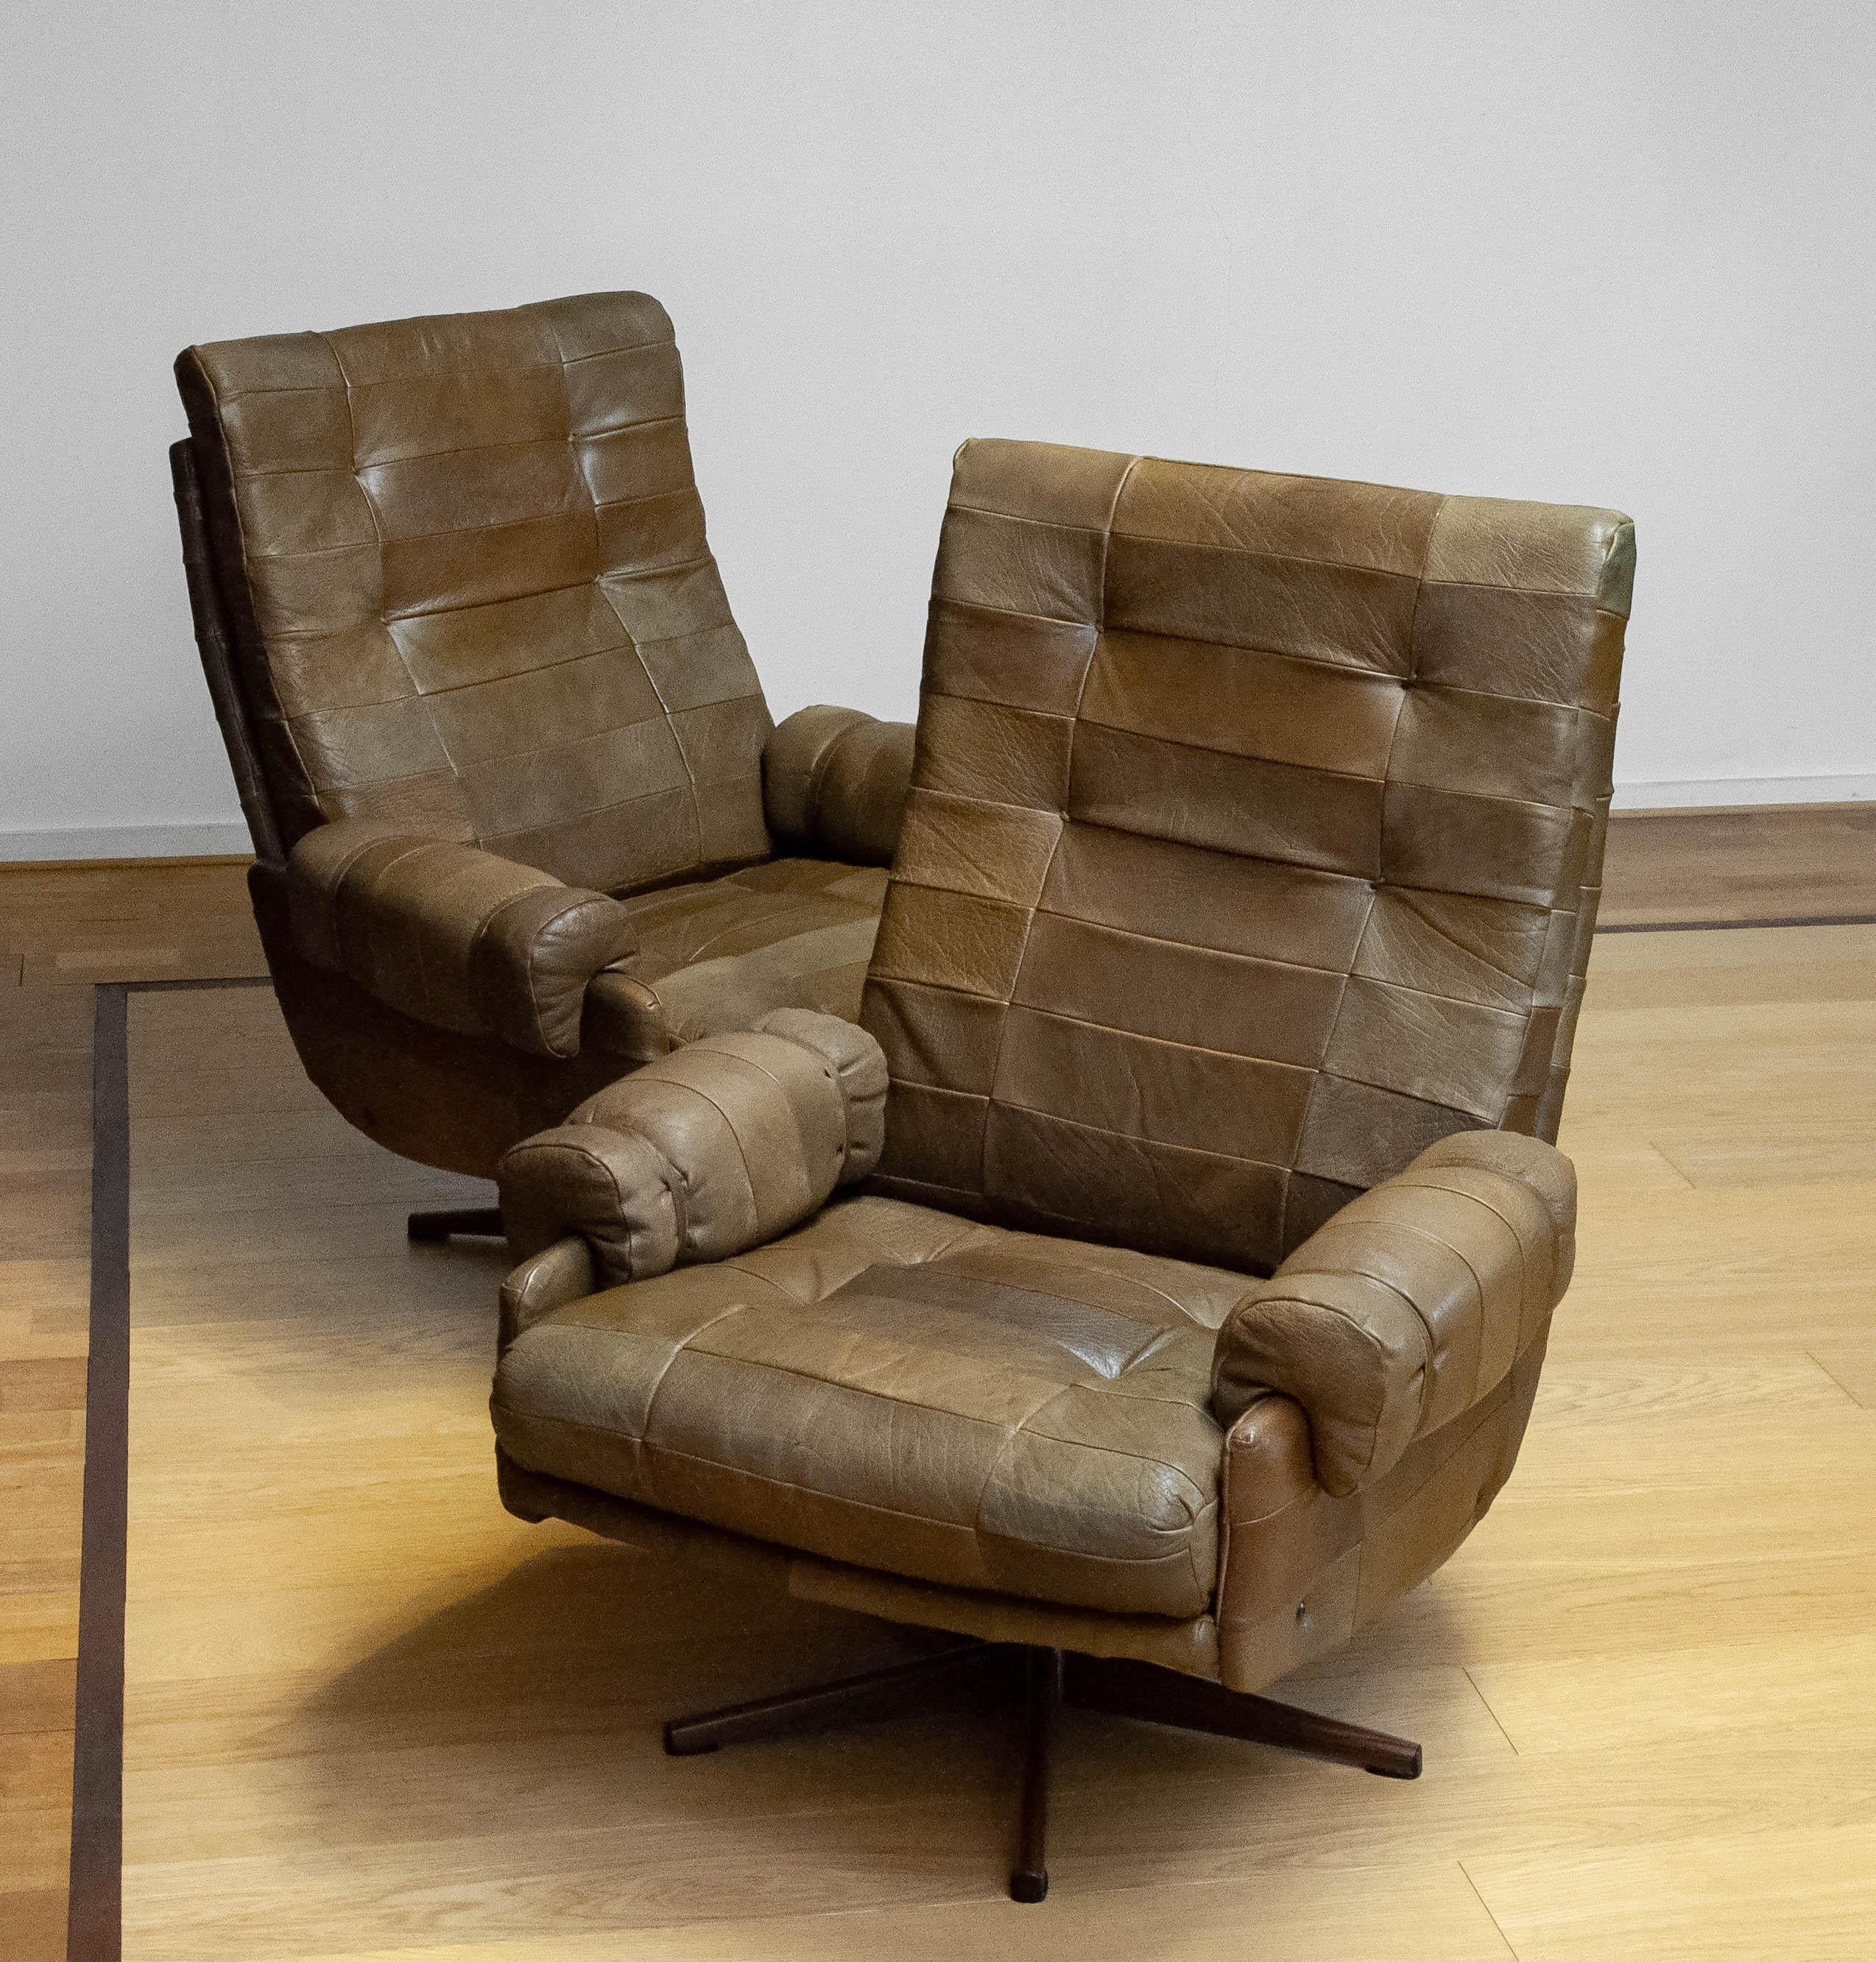 70s Pair Swivel Chairs By Arne Norell In Sturdy Olive Green Buffalo Leather 9